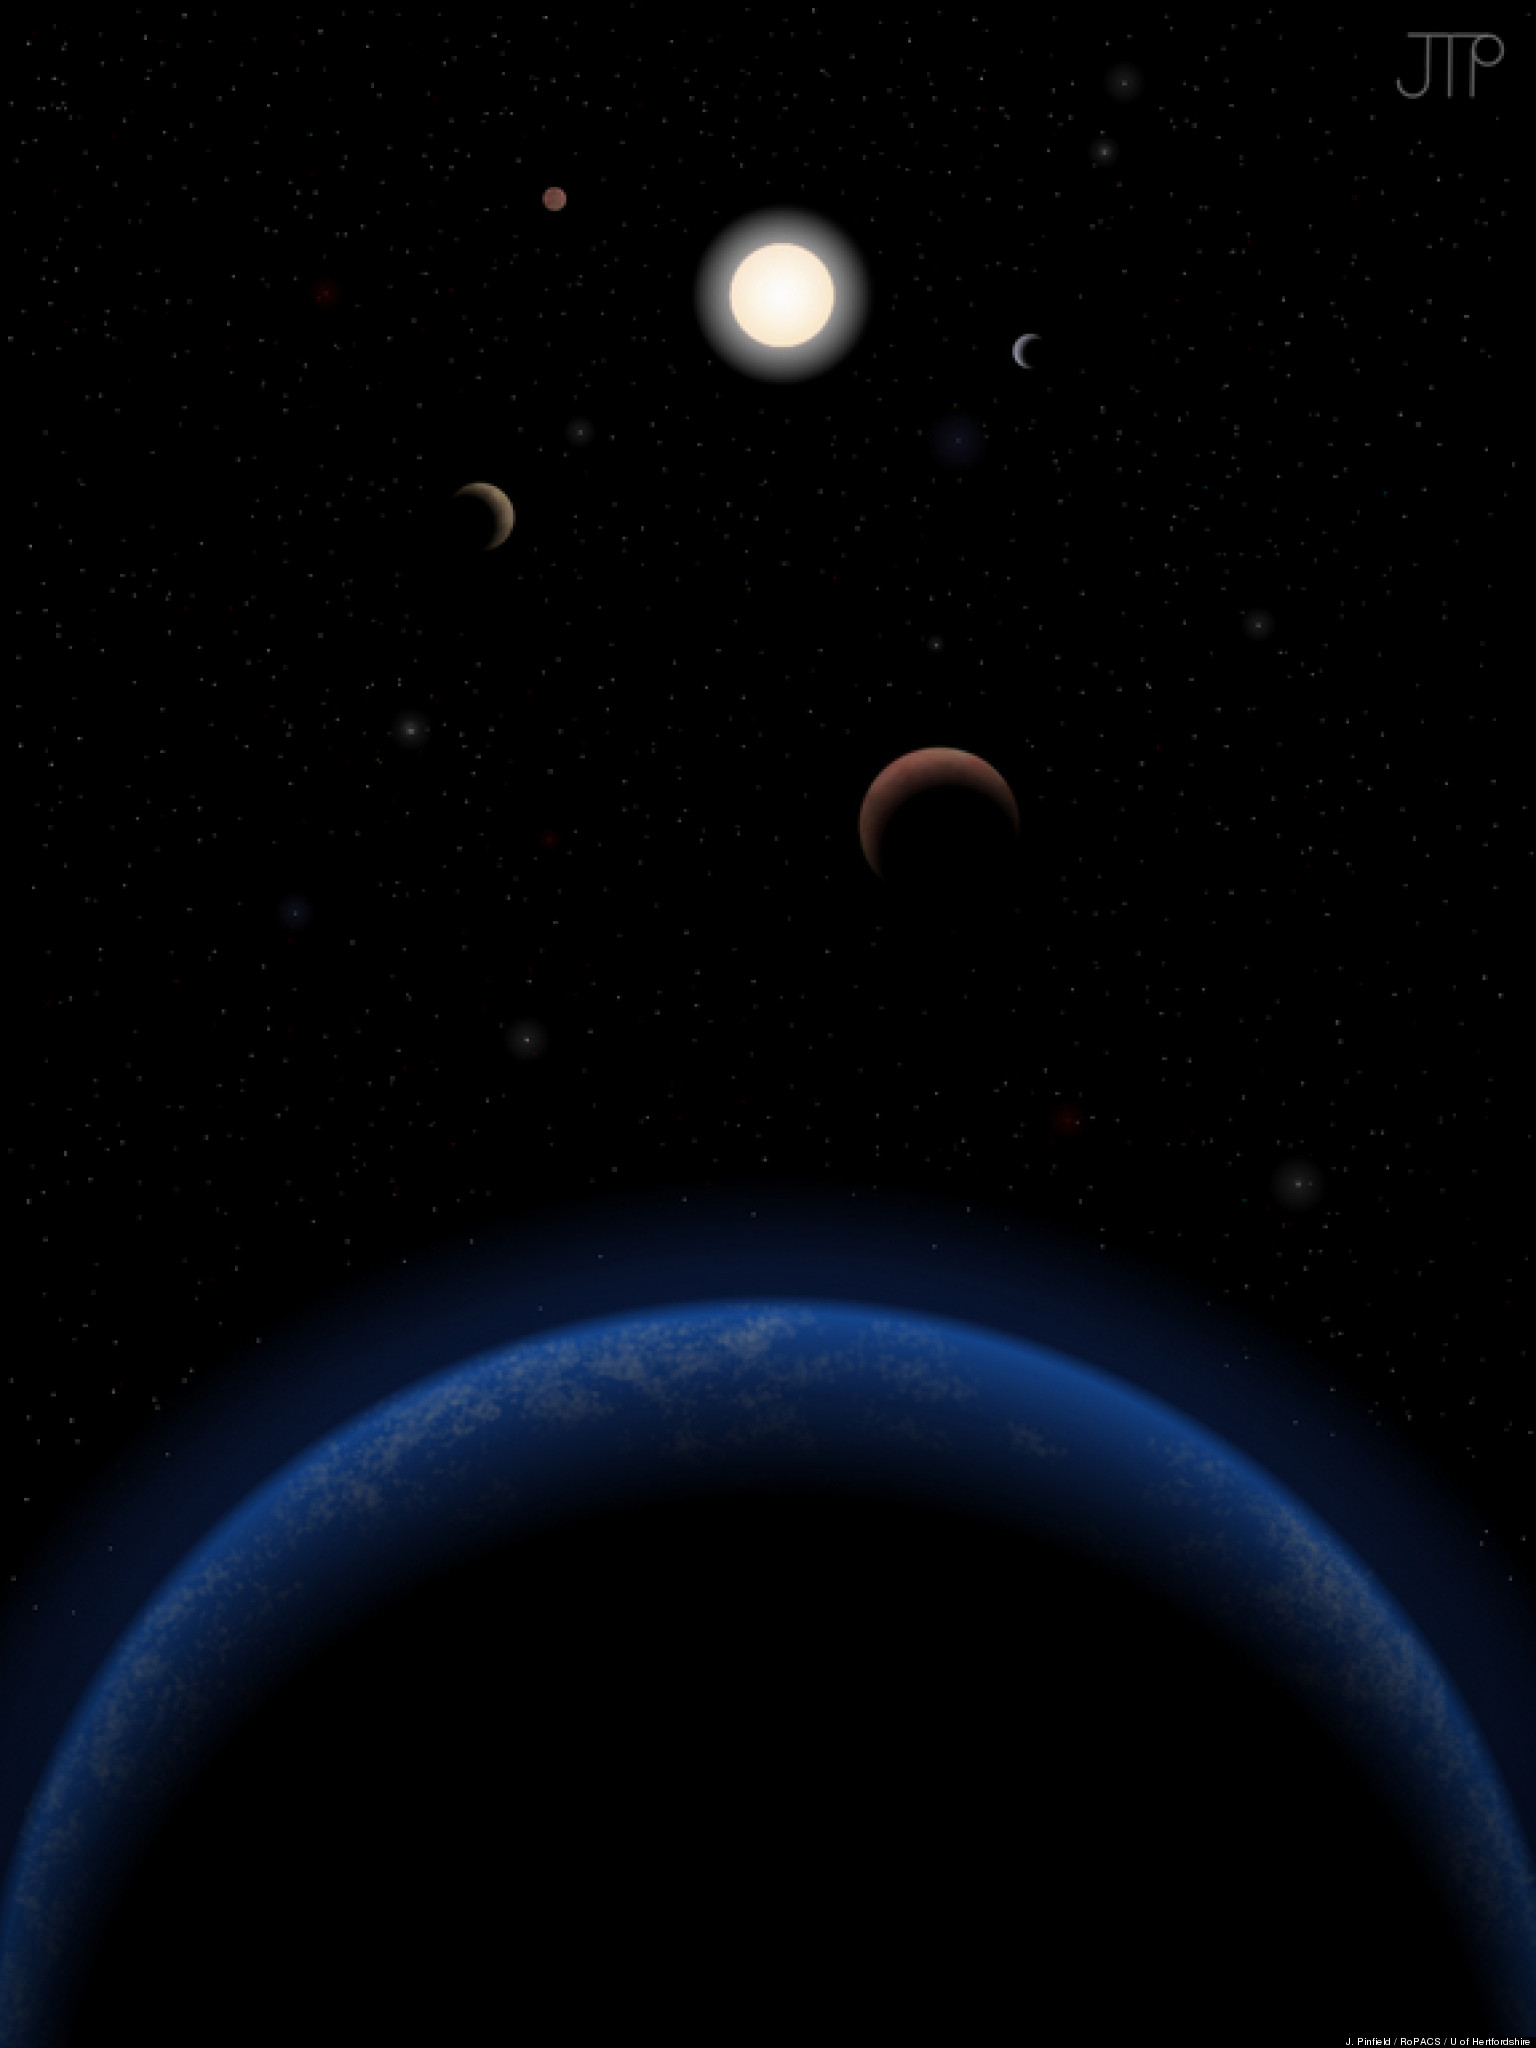 Artwork depicting a potentially habitable planet orbiting 